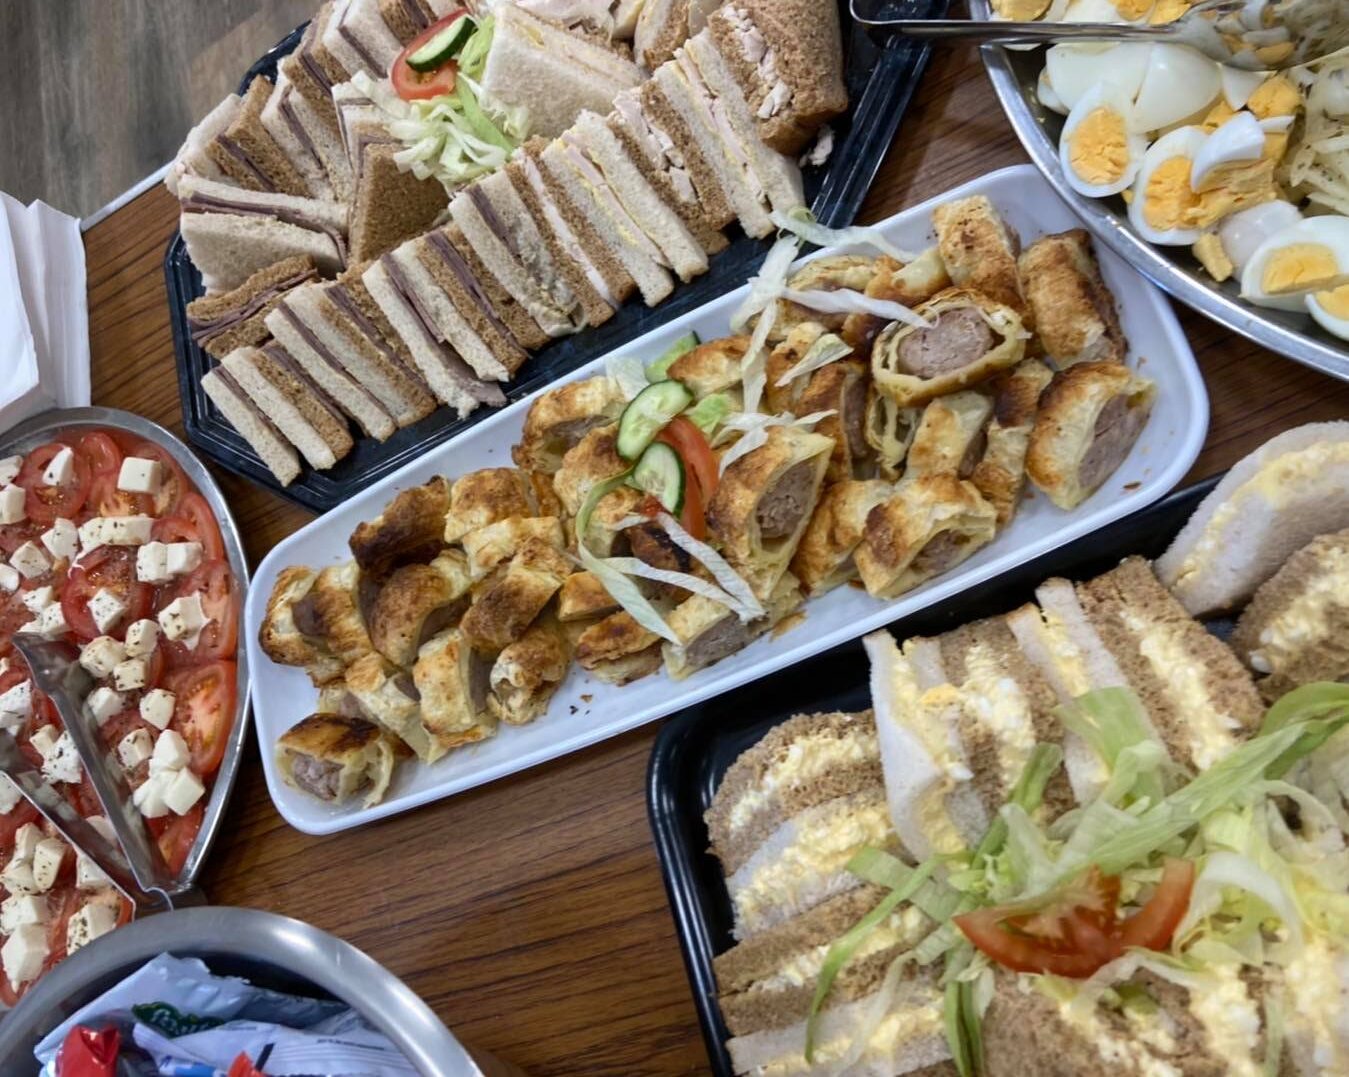 242324010 1700529473479183 4113734531369003942 n rotated our menu marjorys catering,Our Menu selection,HOT & COLD MENUS,BUFFET MENU'S,Afternoon Tea,Children’s Party Buffet,Home Made Desserts